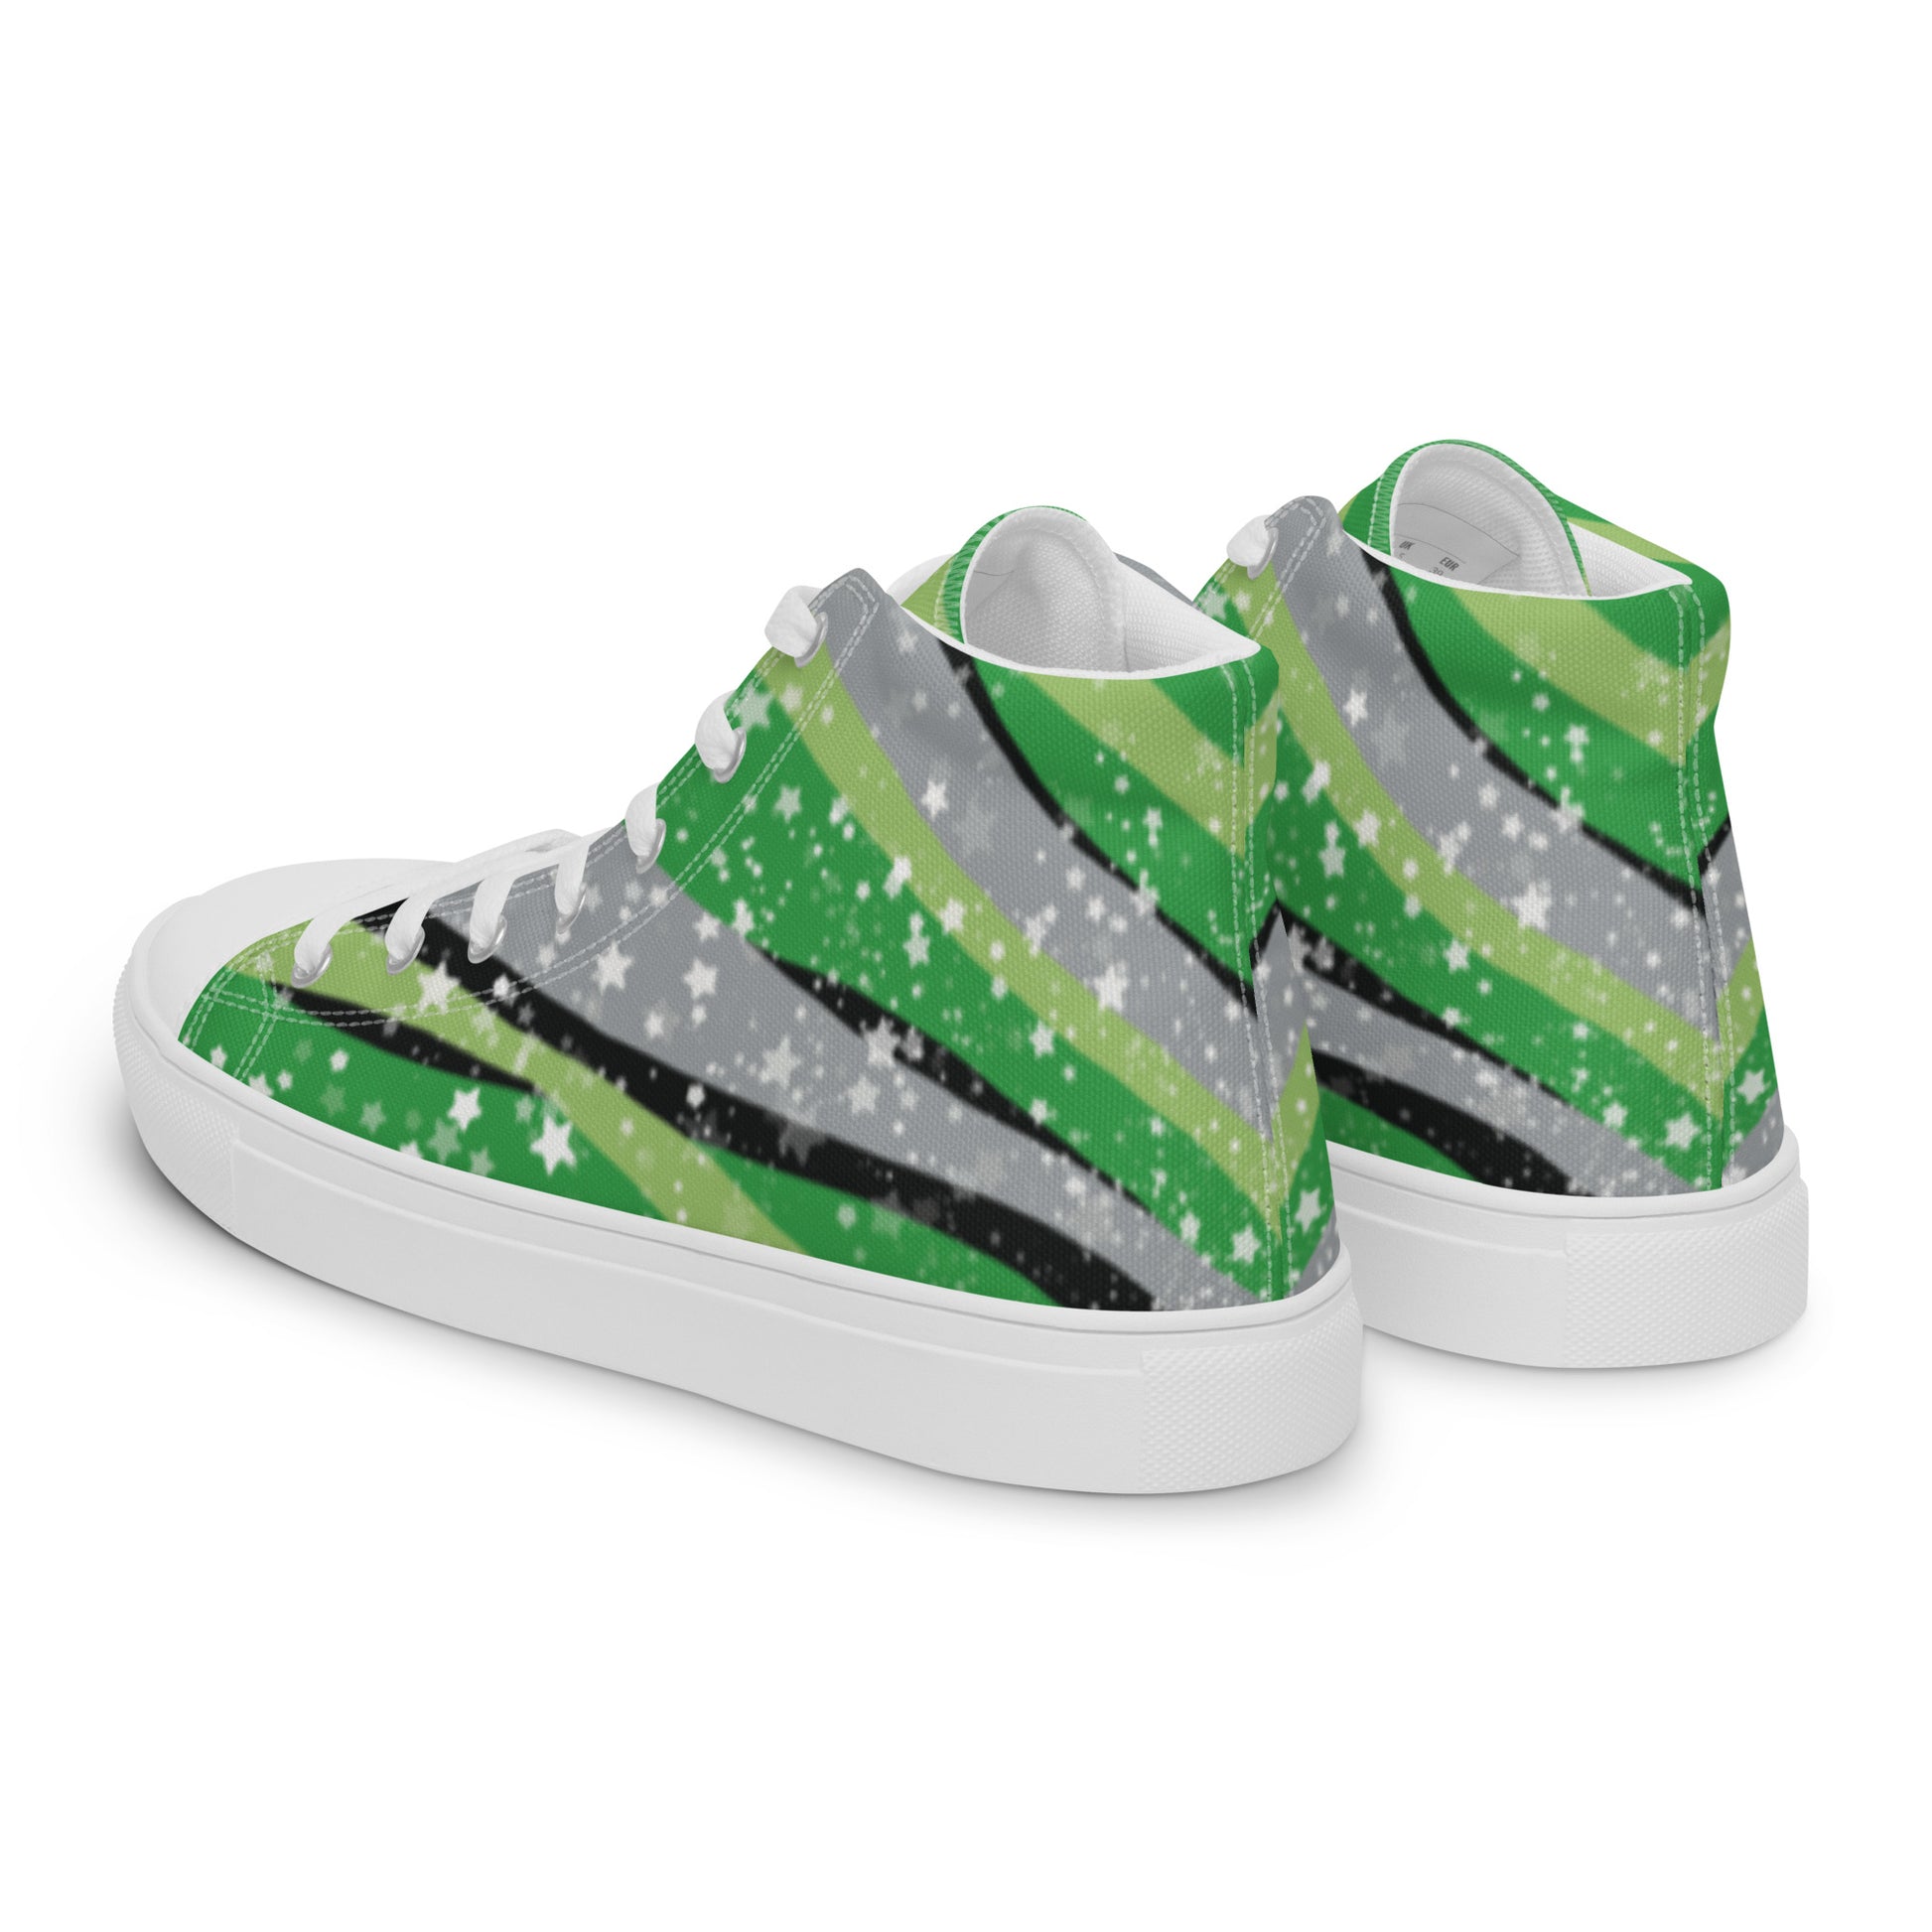 Left back view: a pair of high-top shoes with ribbons of the greens, grey, and black of the aromantic pride flag coming from the heel and expanding towards the laces with an explosion of stars over it, white accents, and the Aras Sivad Studio logo in white on the tongue.